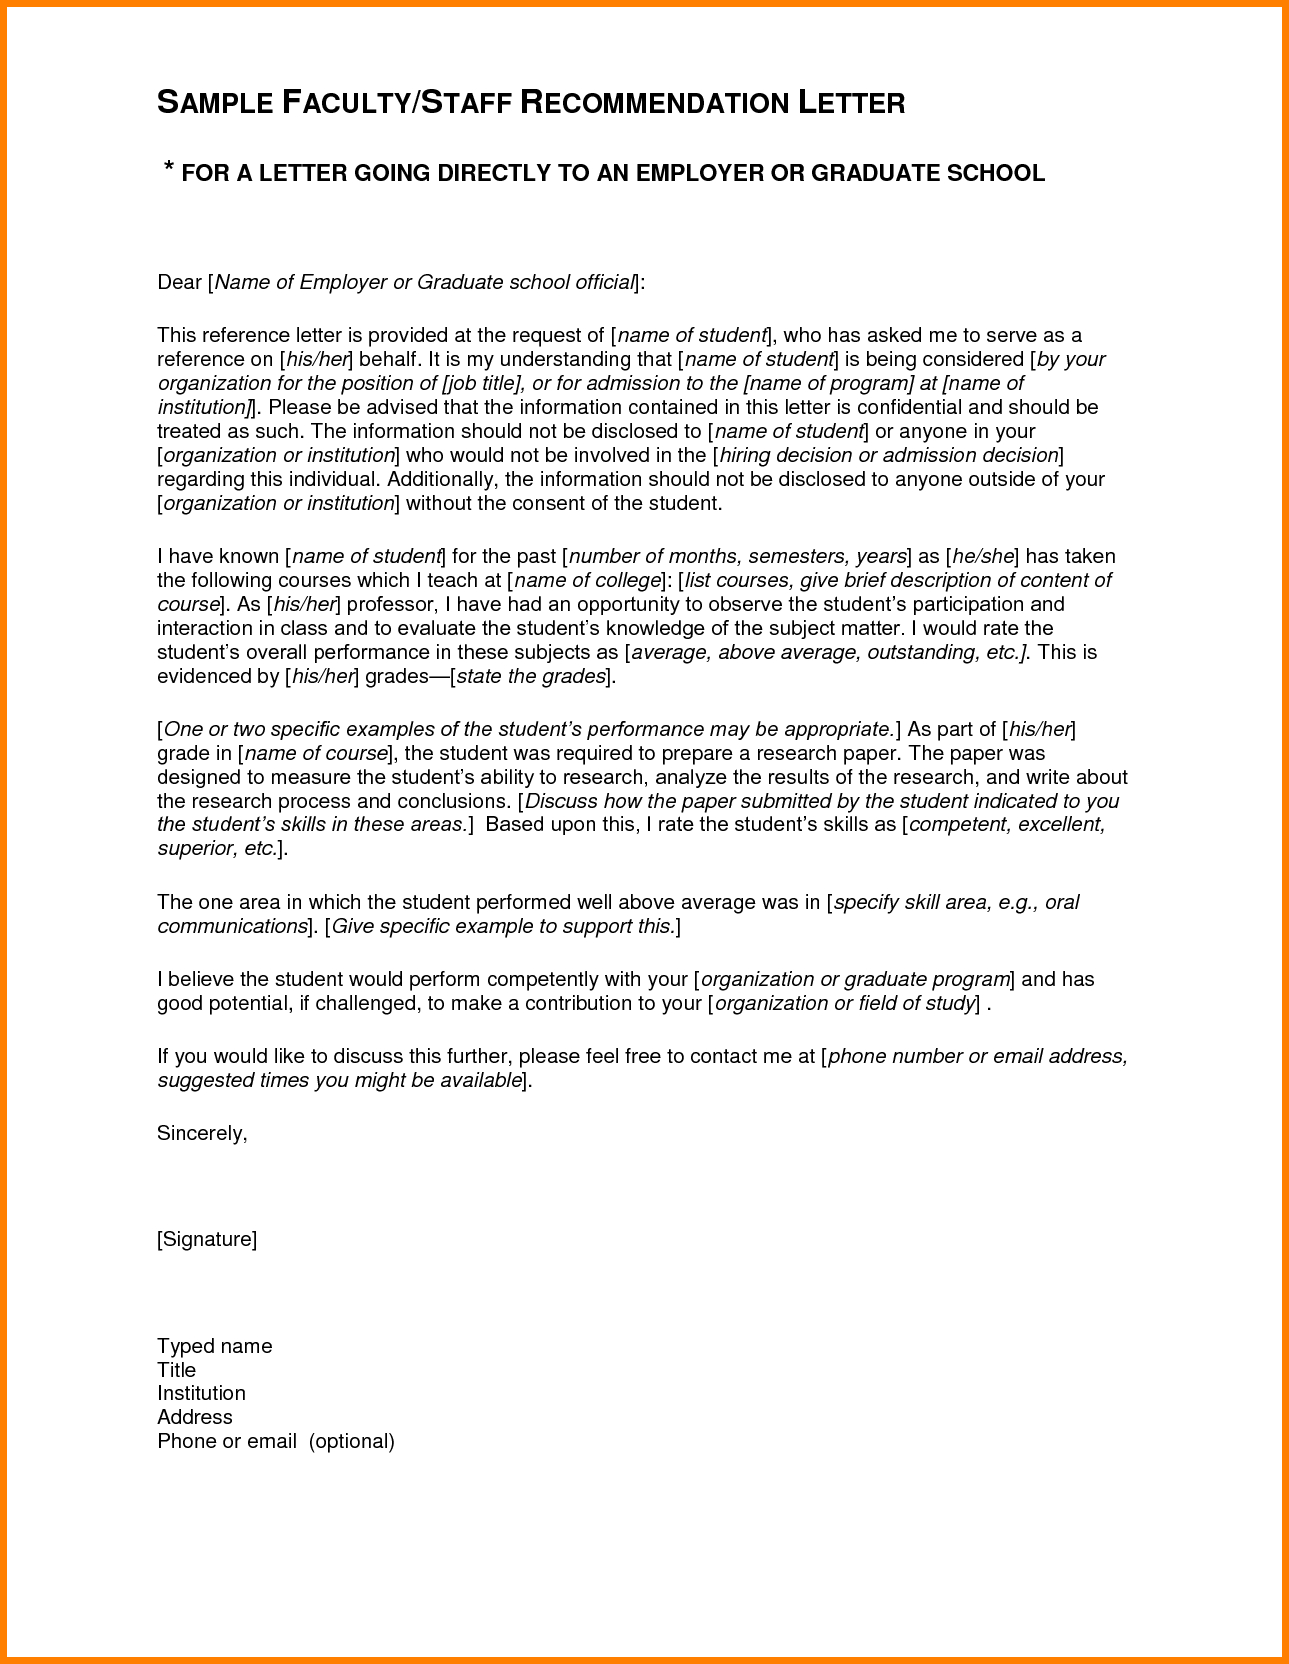 Graduate School Recommendation Letter Template Employer within dimensions 1289 X 1664